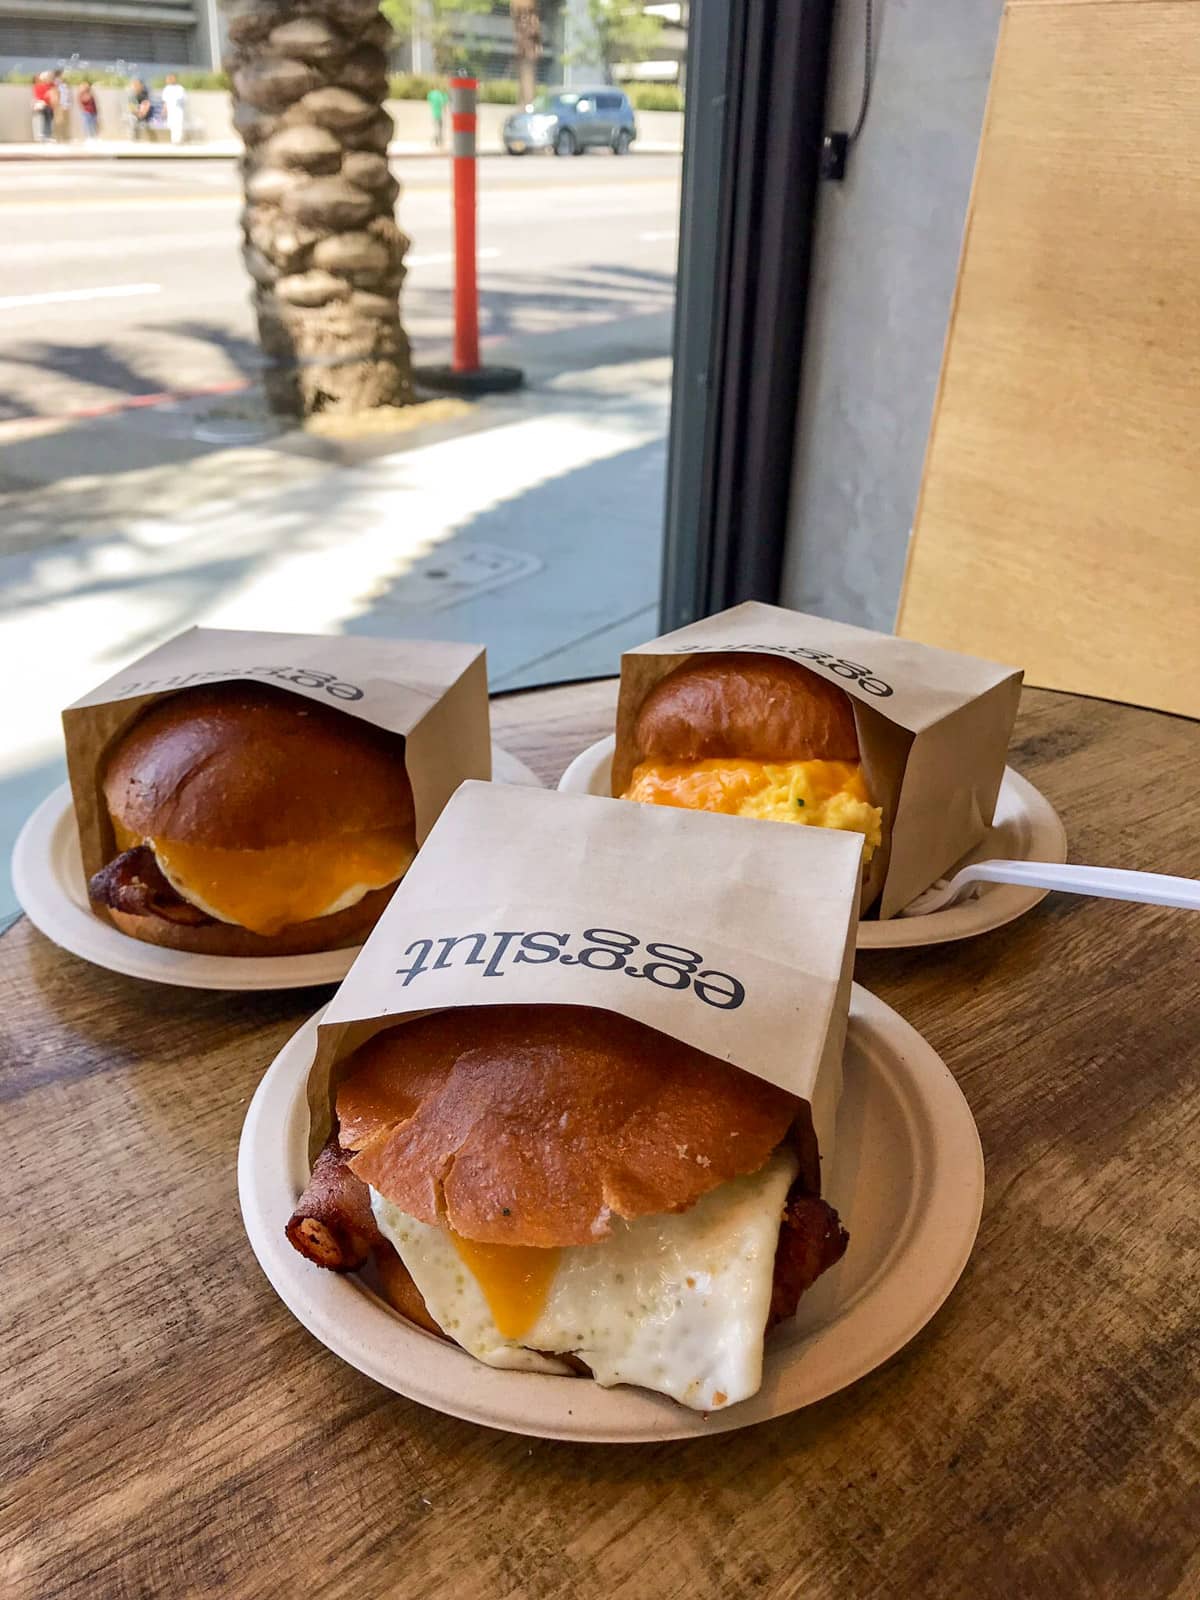 Three egg burgers, individually served in small brown paper bags with the text “eggslut” printed on them. They are all sitting on brown paper plates on a wooden table